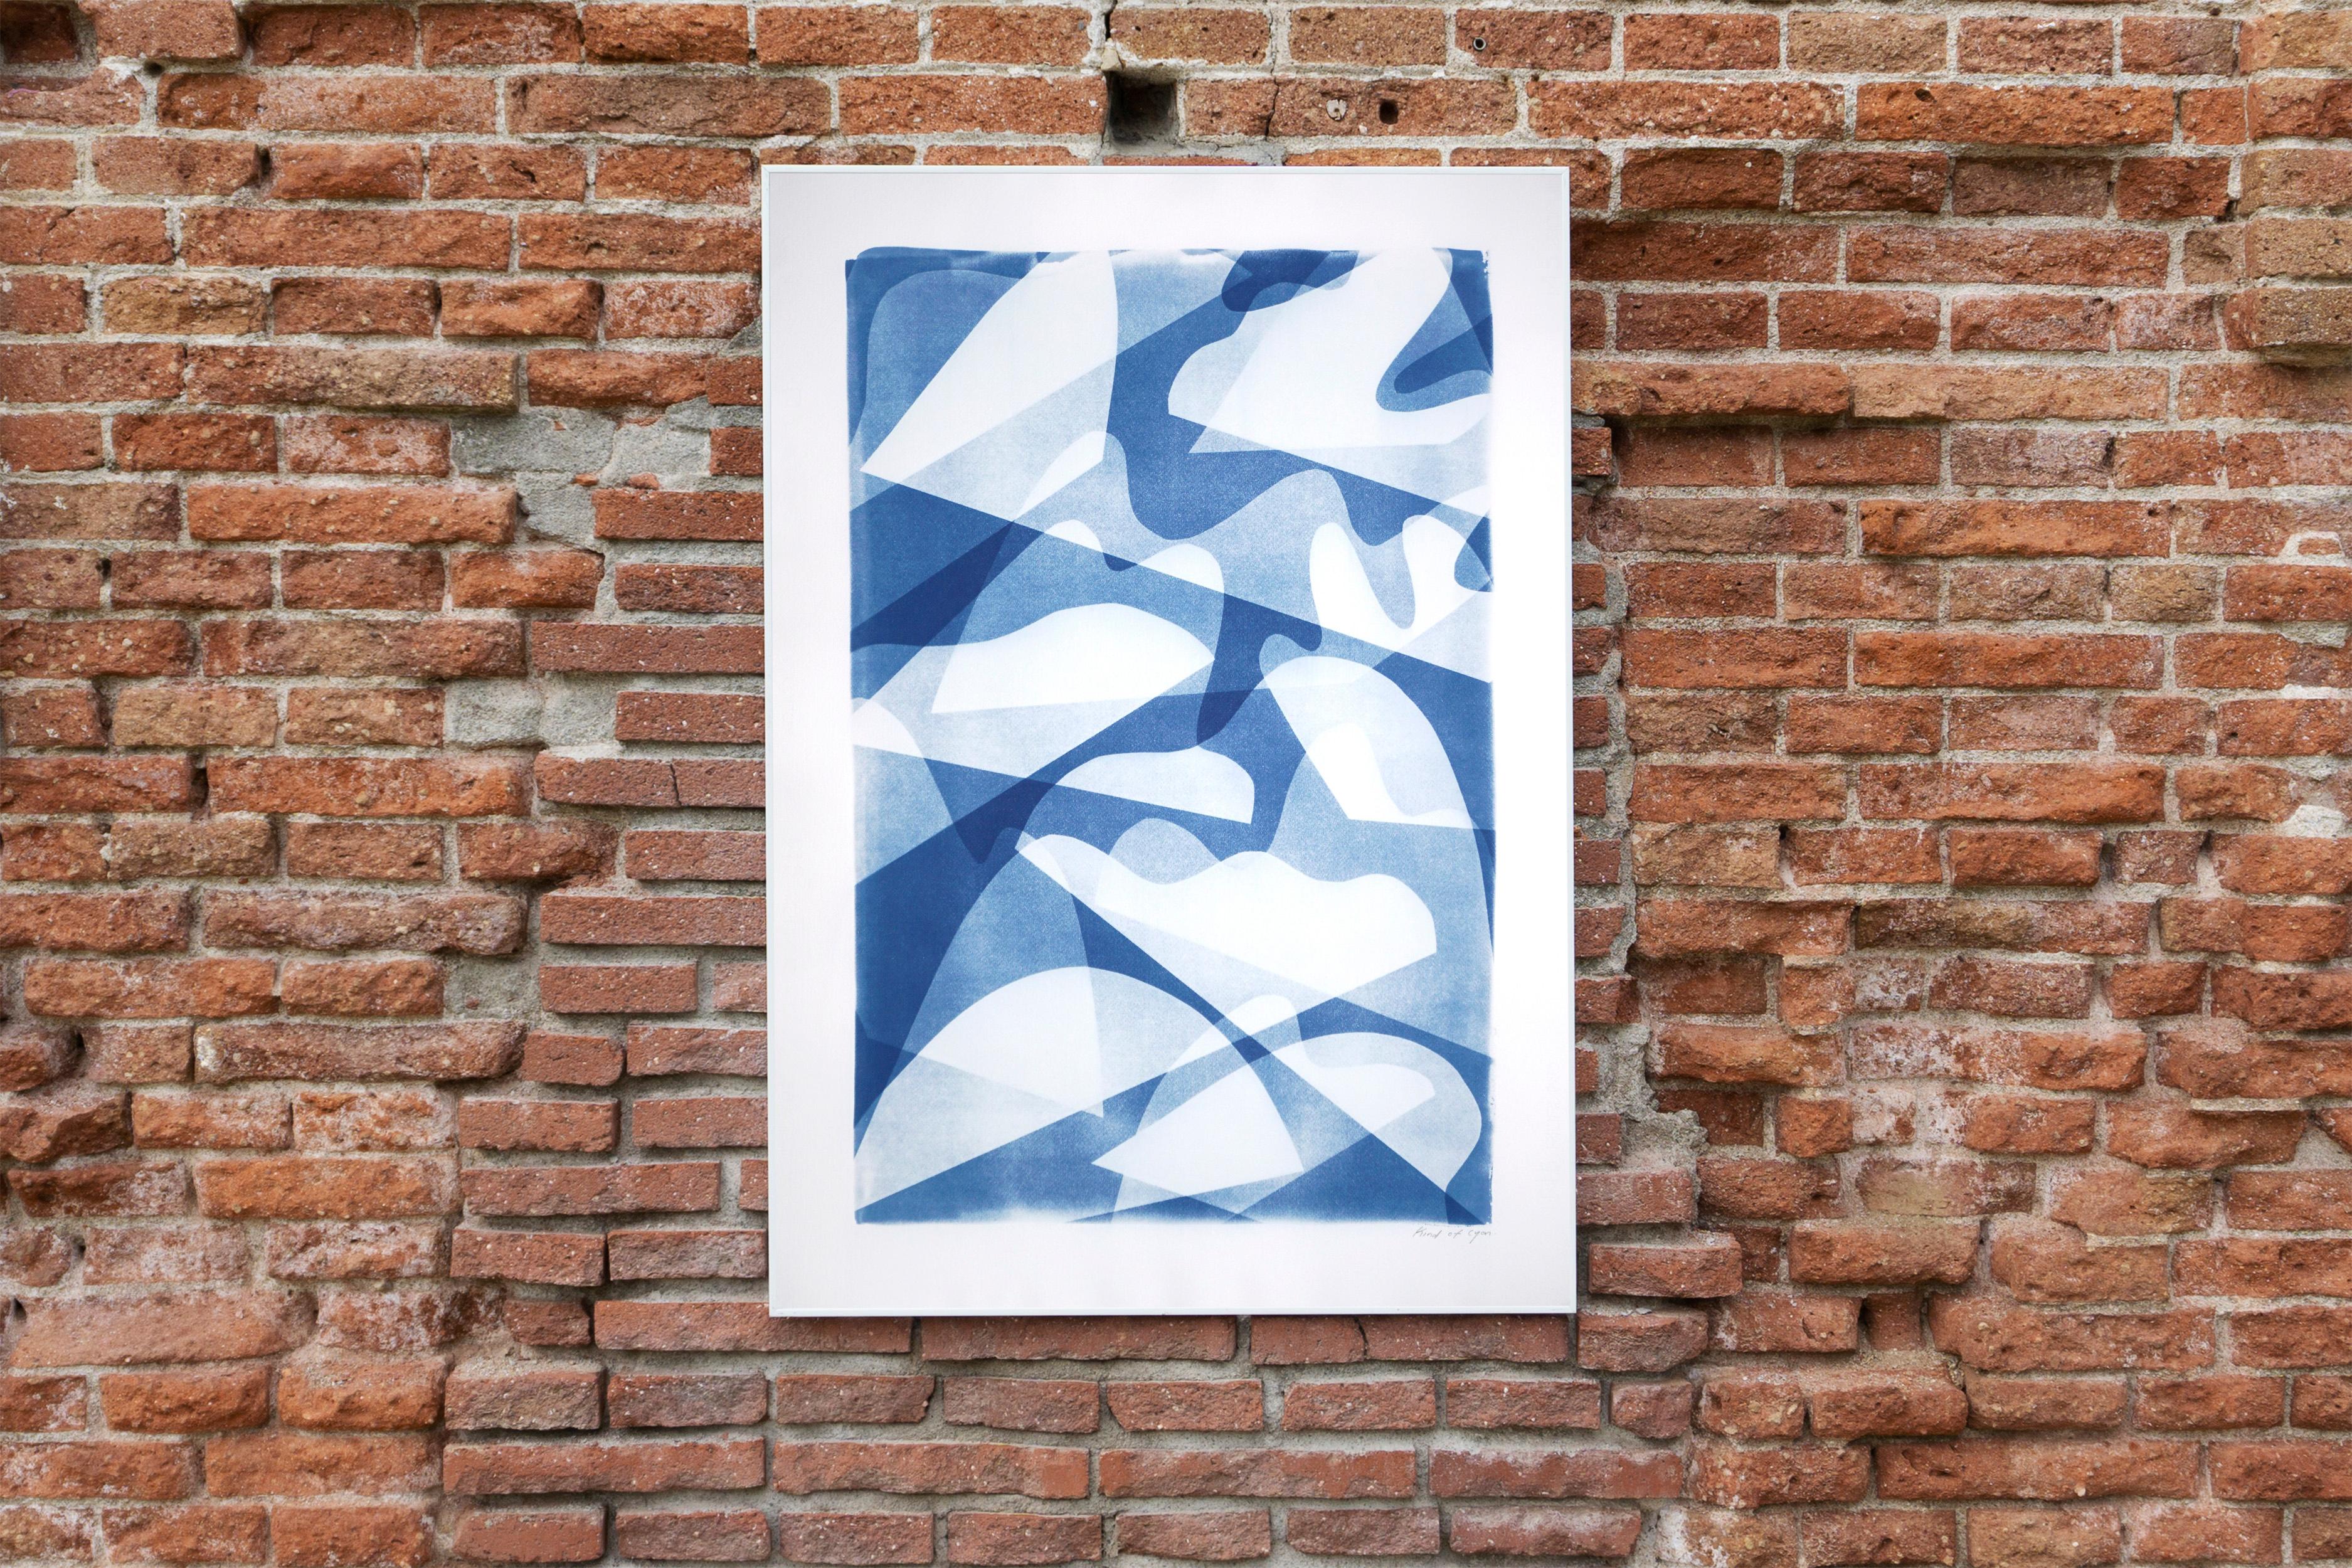 Wind over Water, Handmade Memphis Style Shapes Monotype in Classy Blue Tones - Gray Abstract Photograph by Kind of Cyan